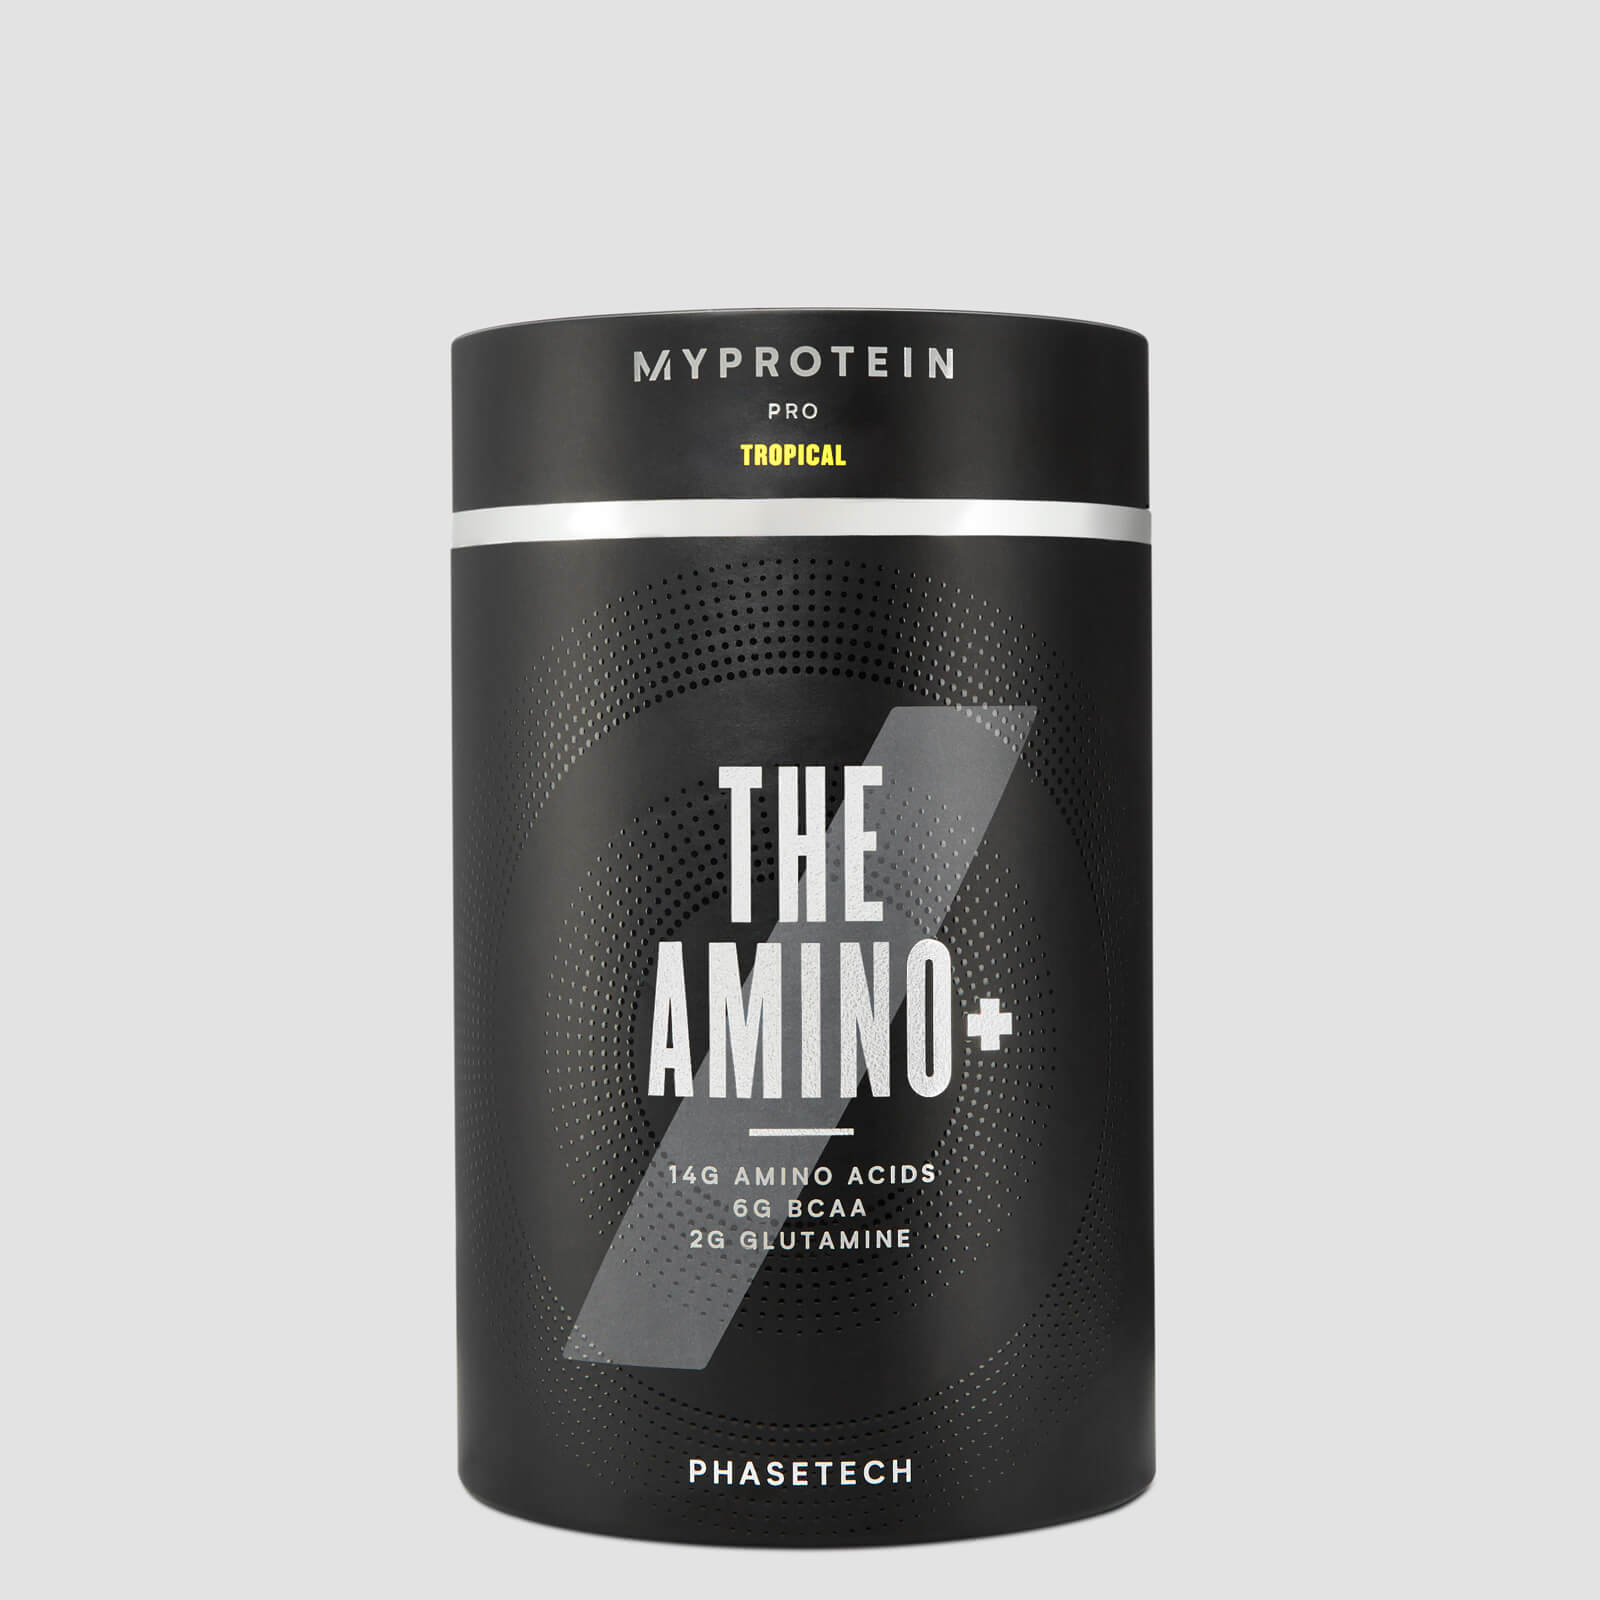 THE Amino+ - 20servings - Tropical